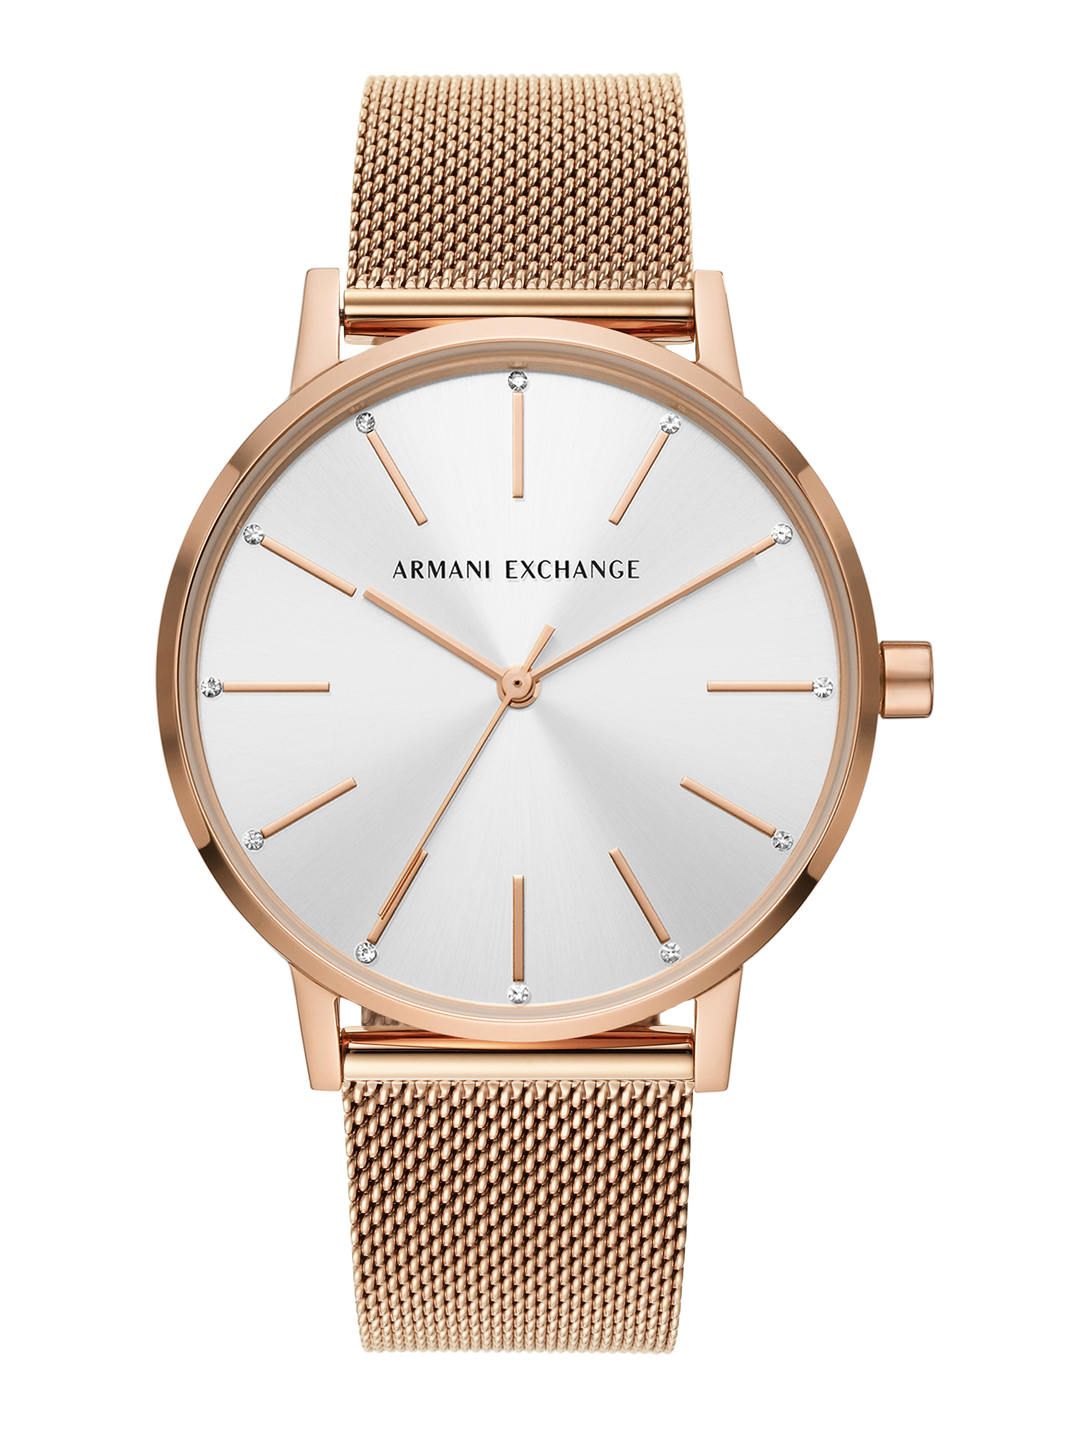 Armani Exchange Women Silver-Toned Dial & Rose Gold-Toned Straps Analogue Watch AX5573 Price in India